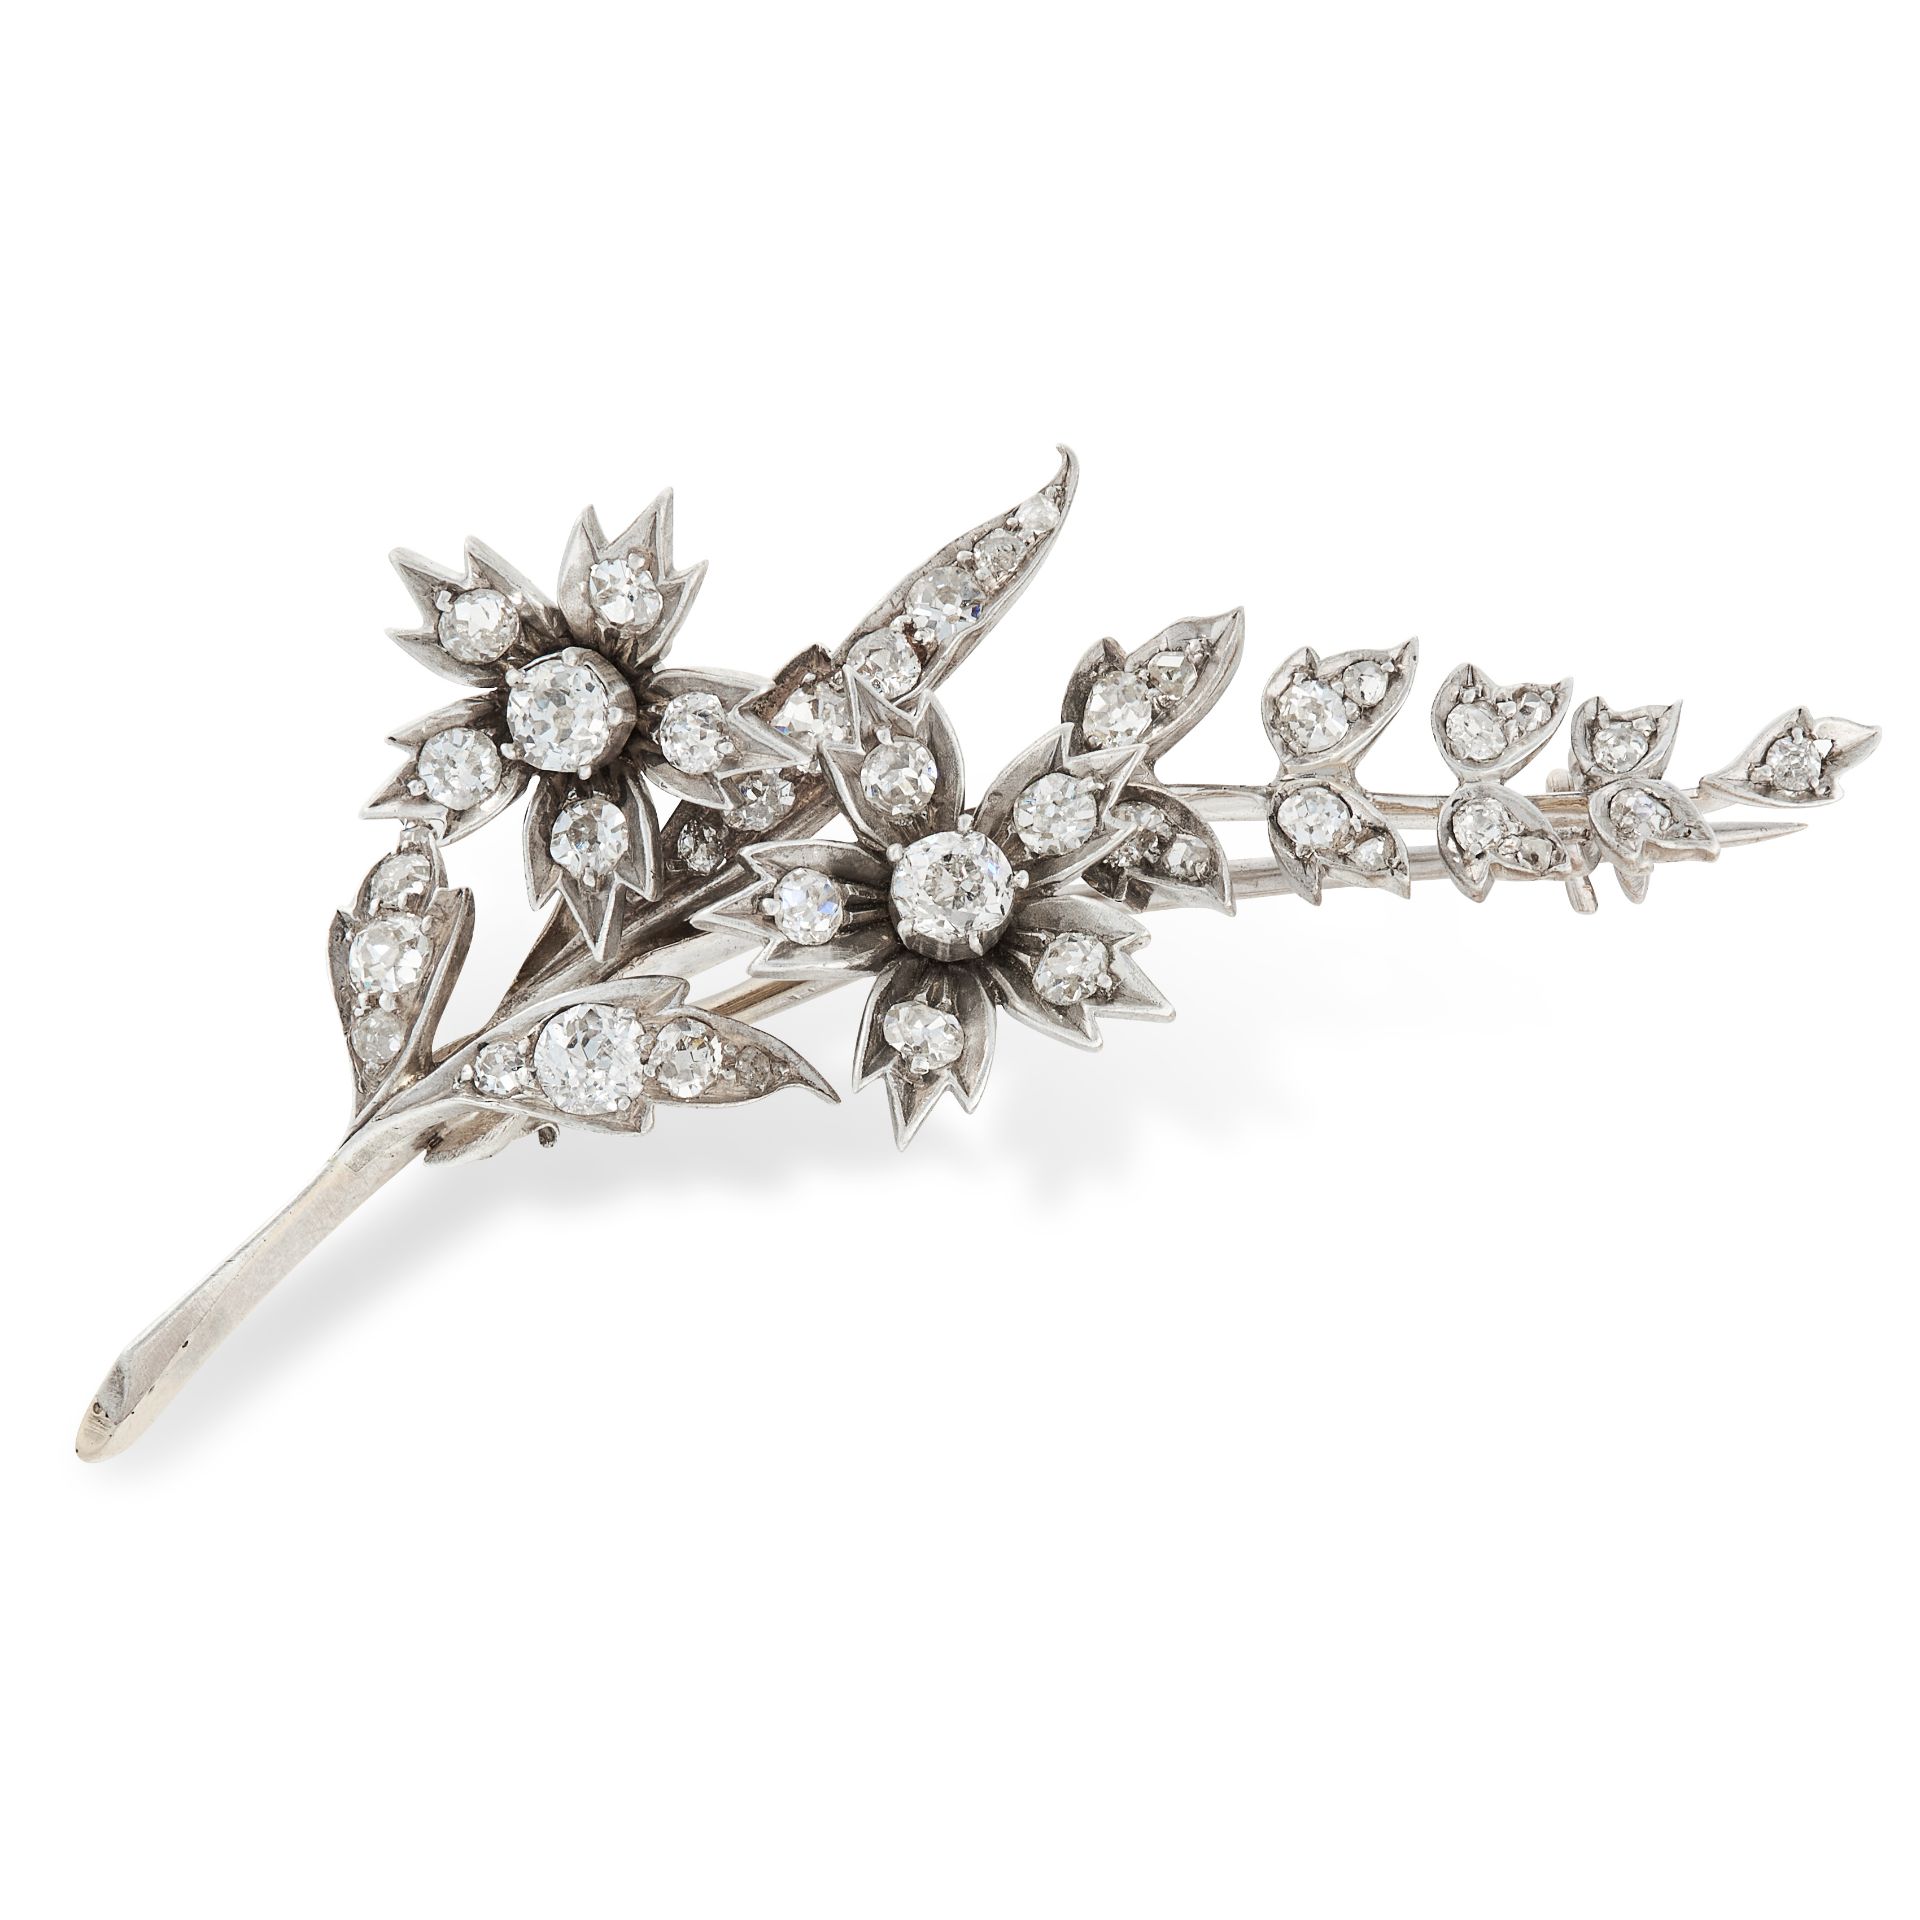 AN ANTIQUE DIAMOND BROOCH, 19TH CENTURY in yellow gold and silver, designed to depict a branch of